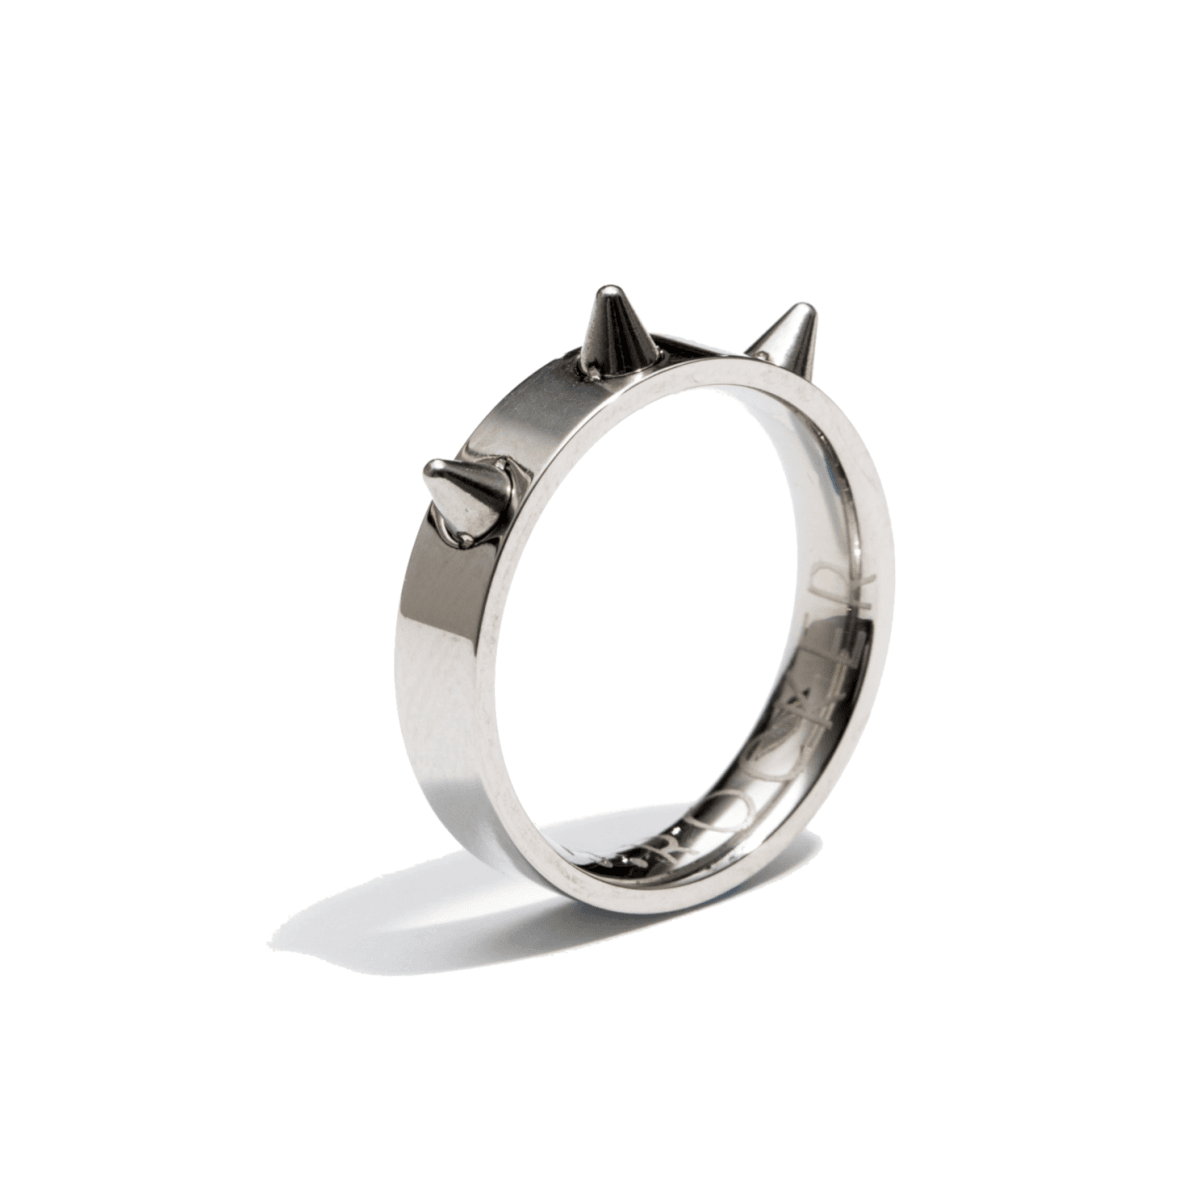 The Beast Mode Spike Ring